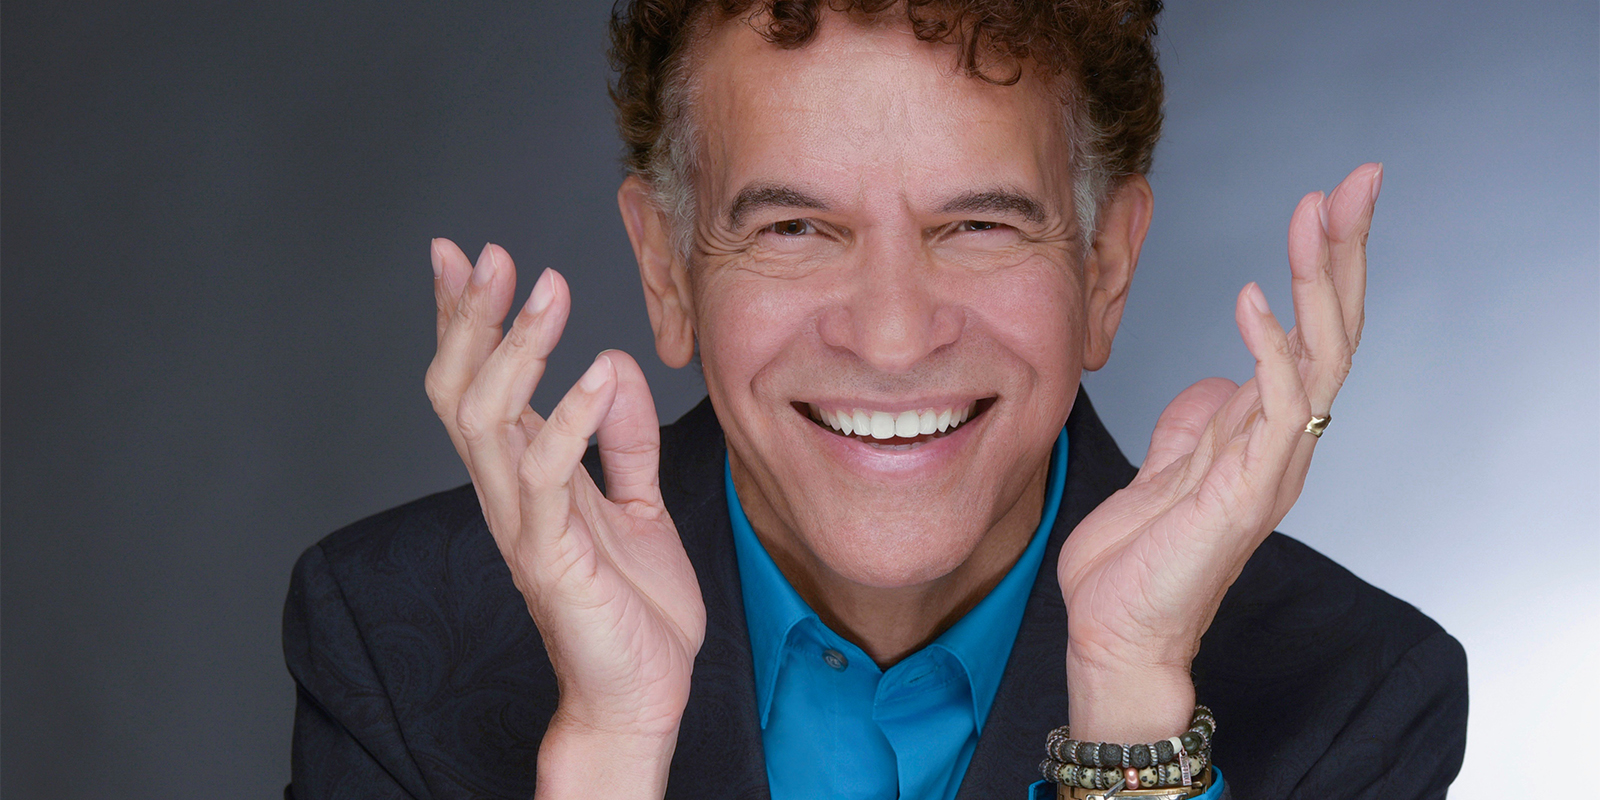 Brian Stokes Mitchell looking that viewer with a smile.